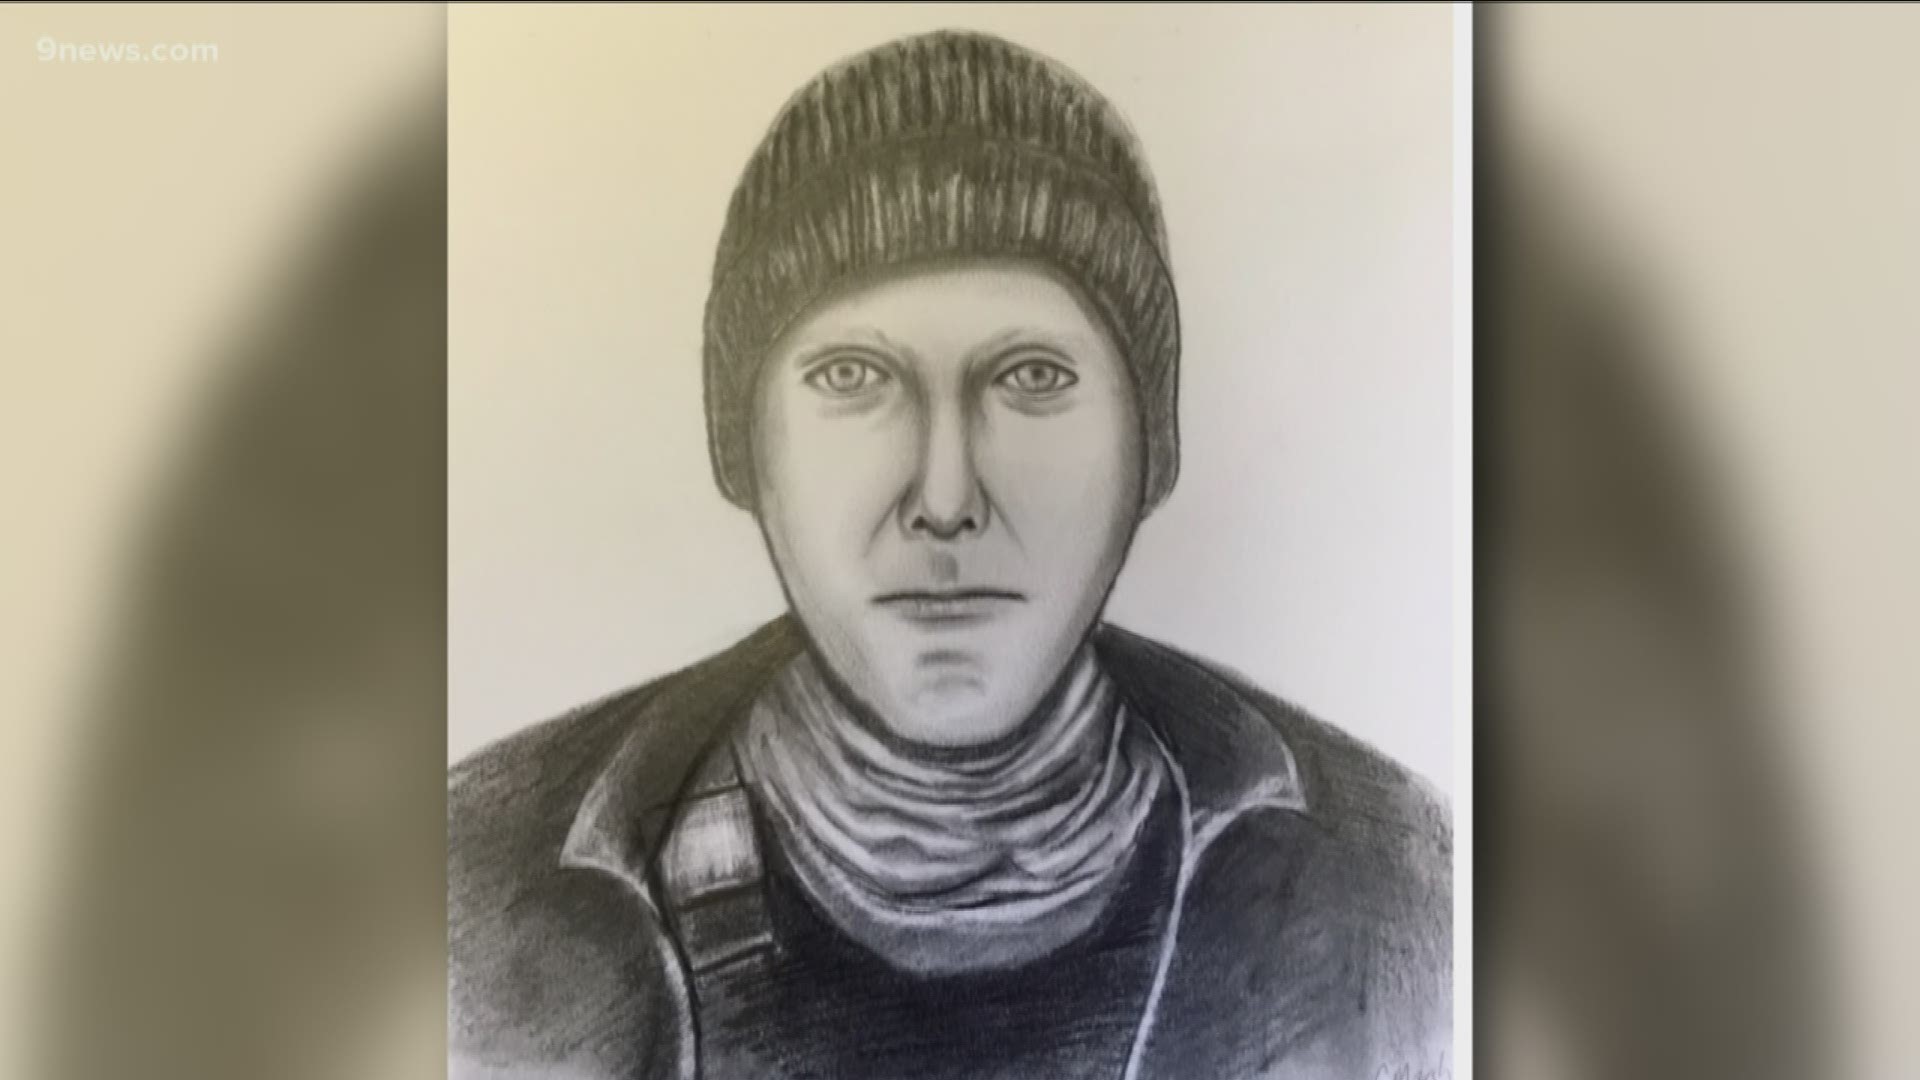 DPD released a sketch of the man who was wearing a black police-style  jacket and what appeared to be a bullet-proof vest.